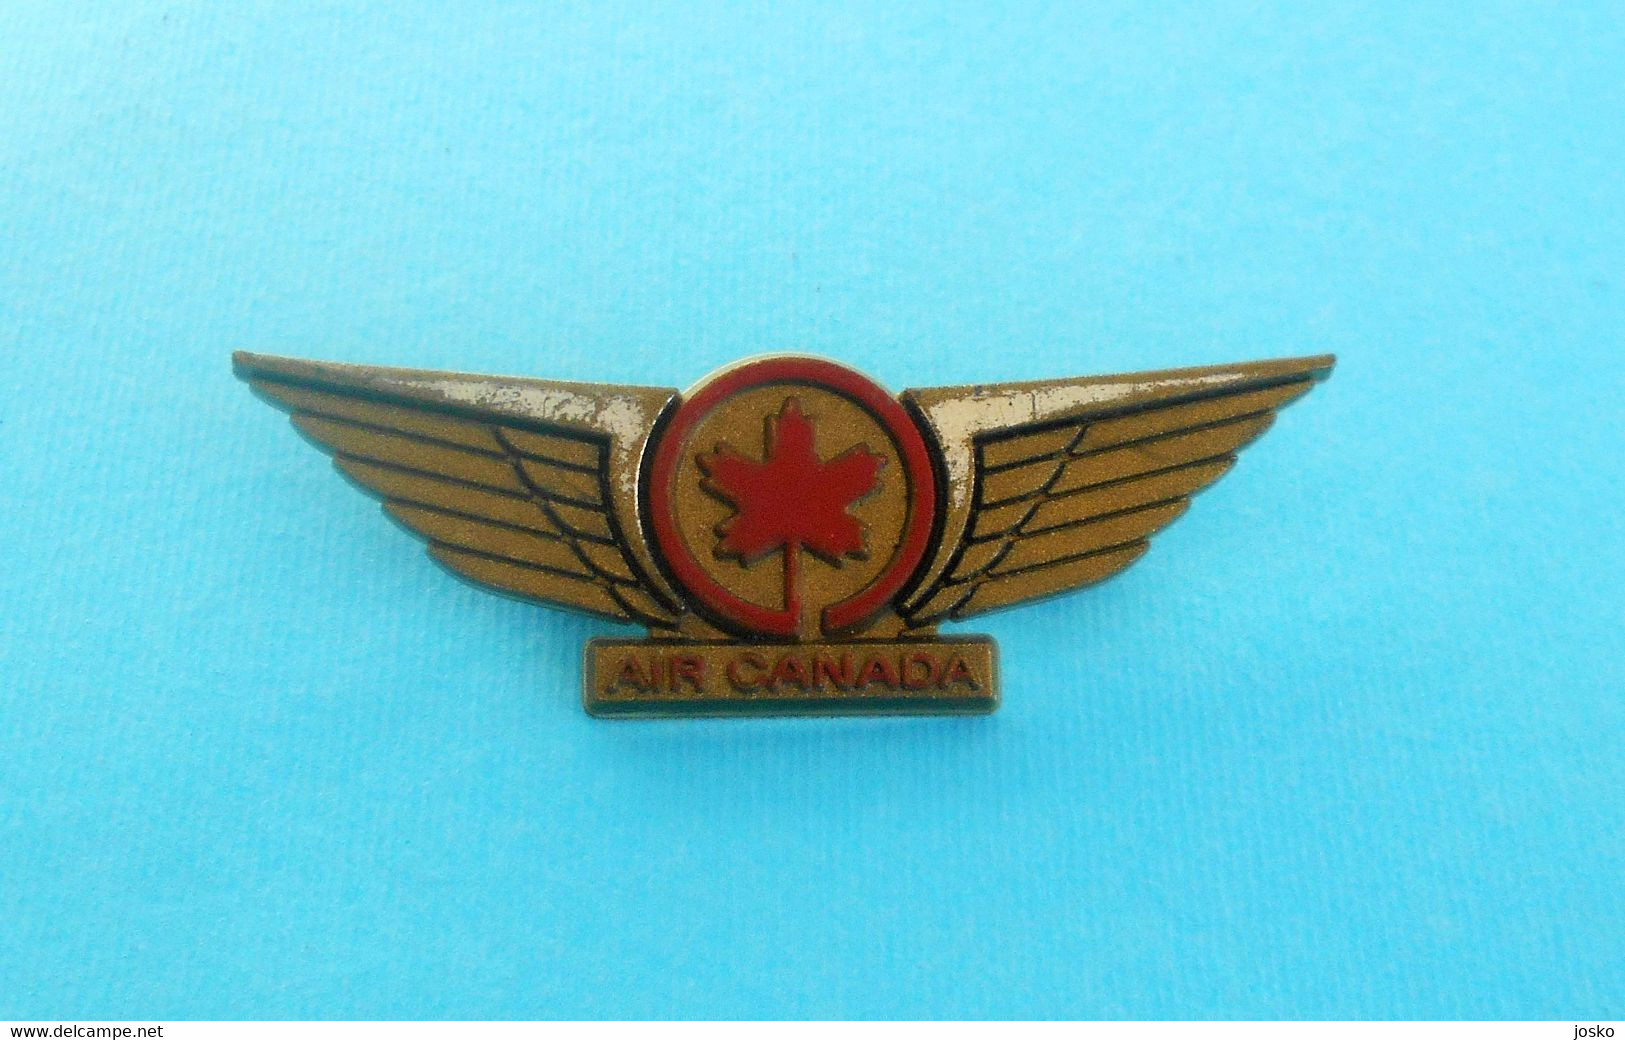 AIR CANADA ... Vintage Pilot Wings Badge * Canada National Airlines * Airways Airline Air Company Pilote Plane Avion - Crew-Abzeichen